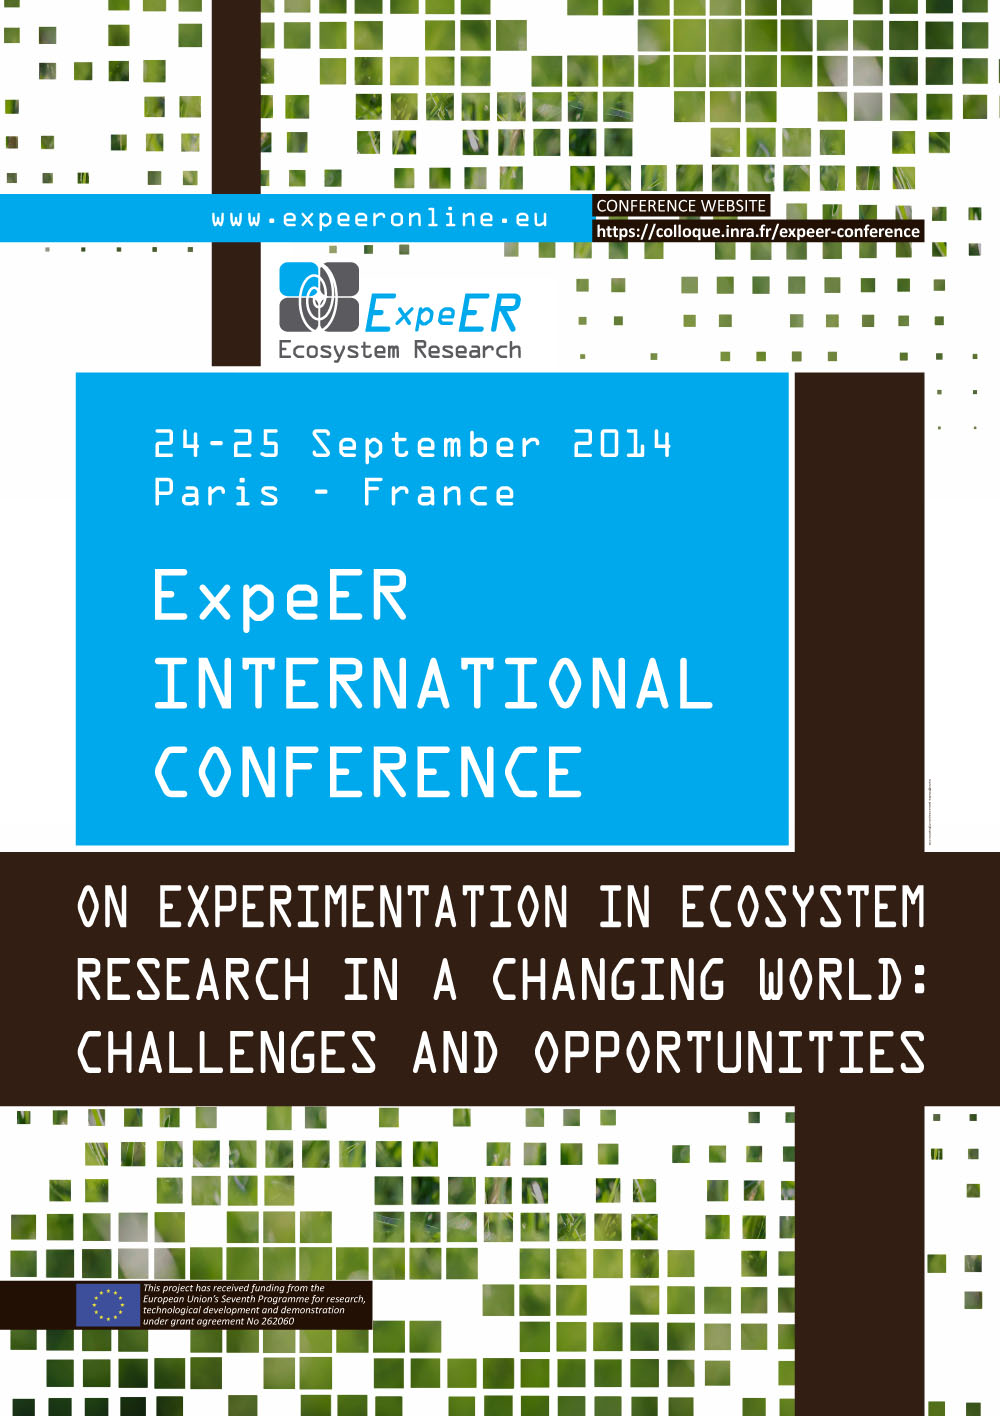 ExpeER international conference 